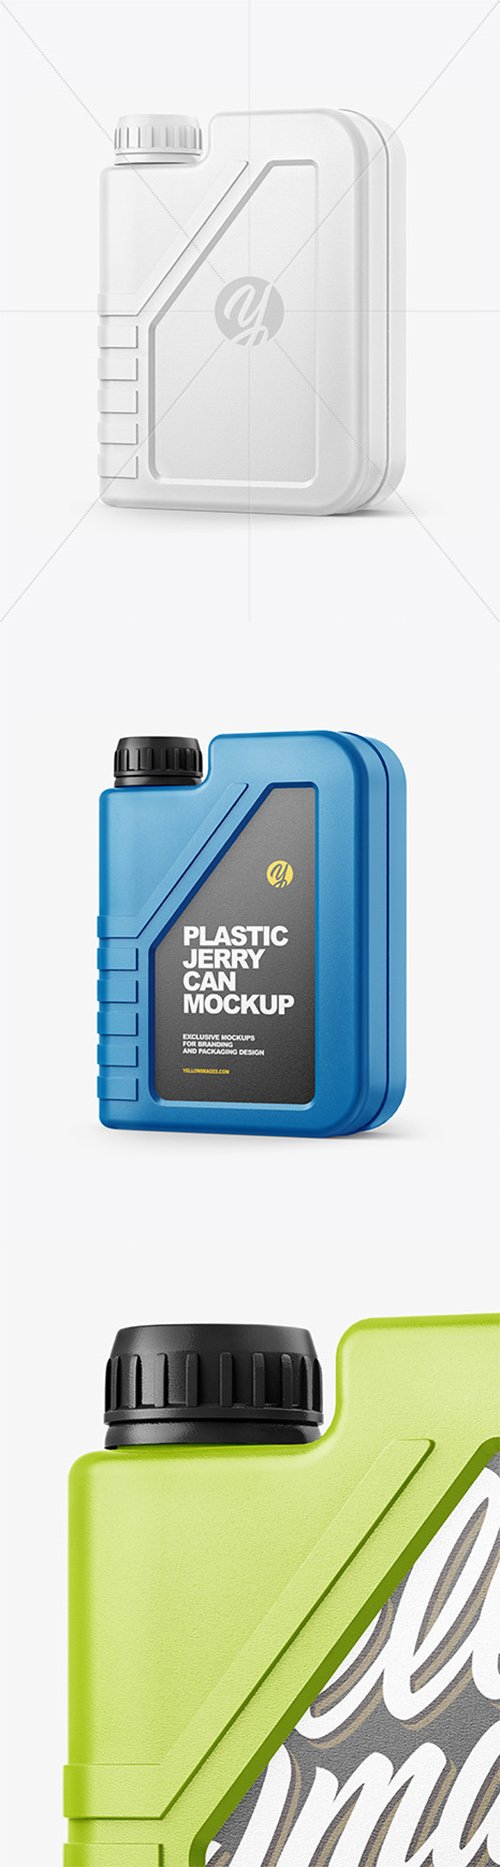 Glossy Plastic Jerry Can Mockup 65693